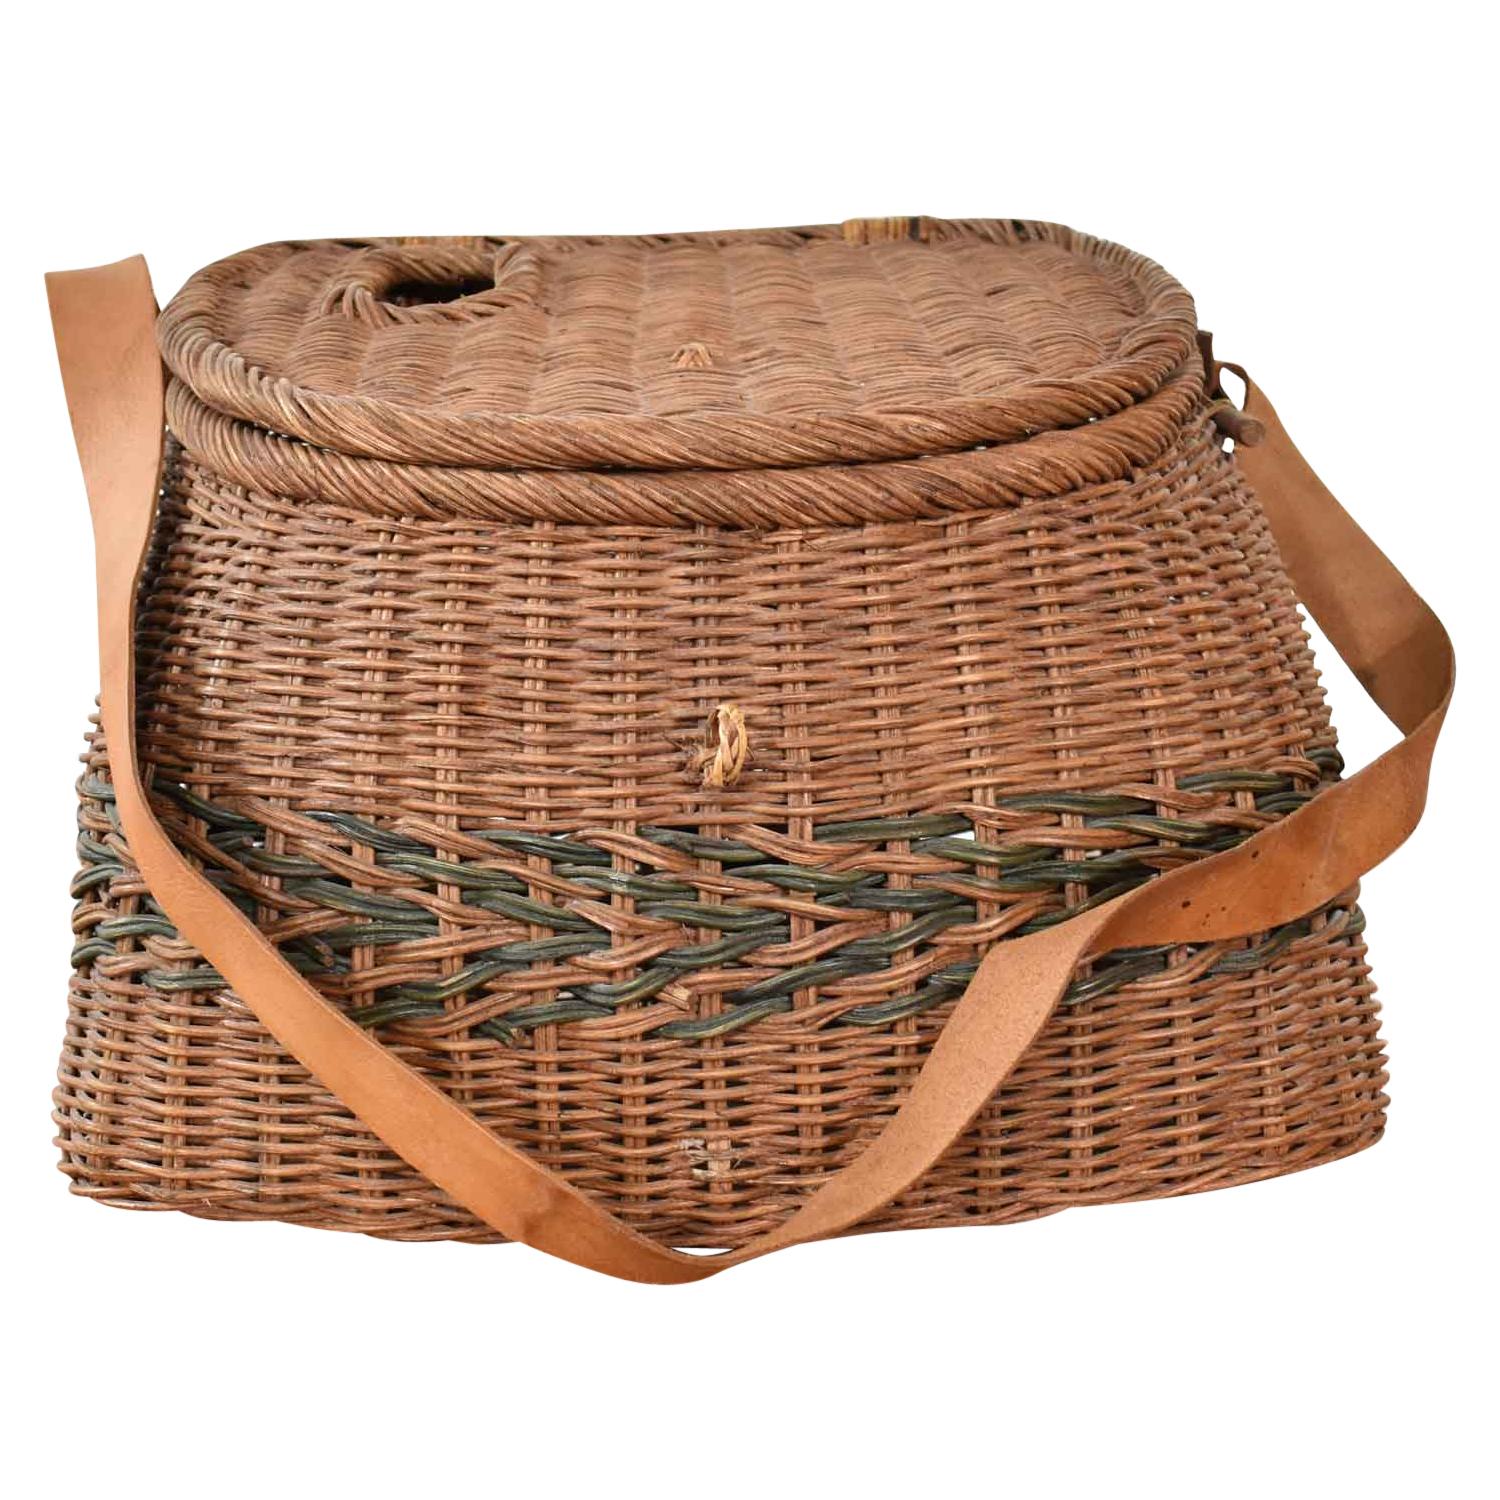 Antique Wicker Basket Fishing Creel with Leather Strap Handle at